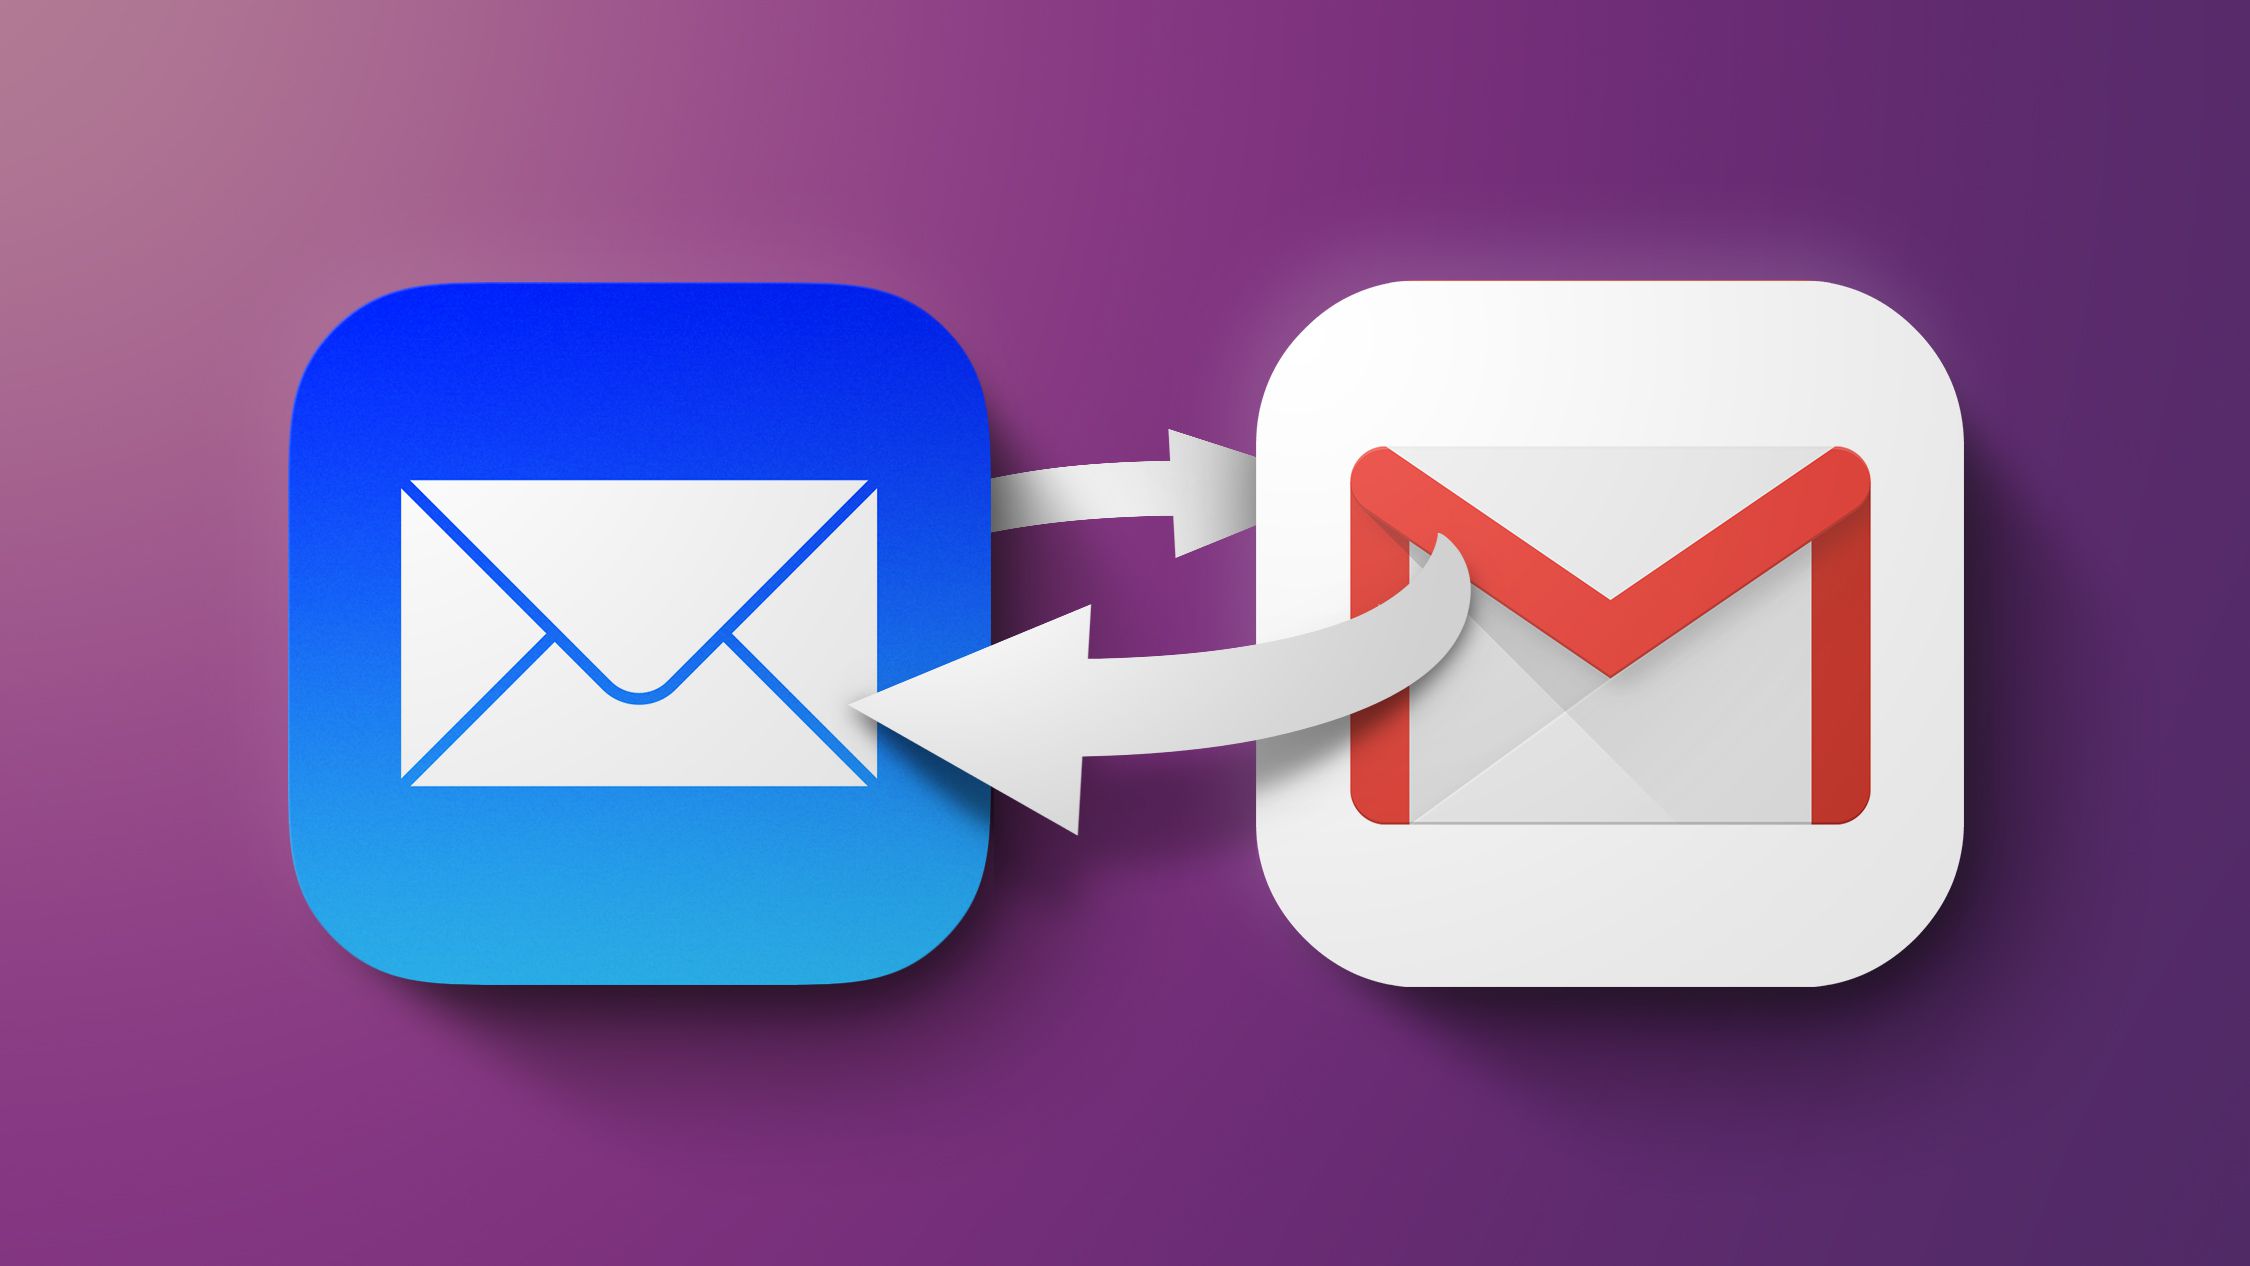 email app for both iphone and mac